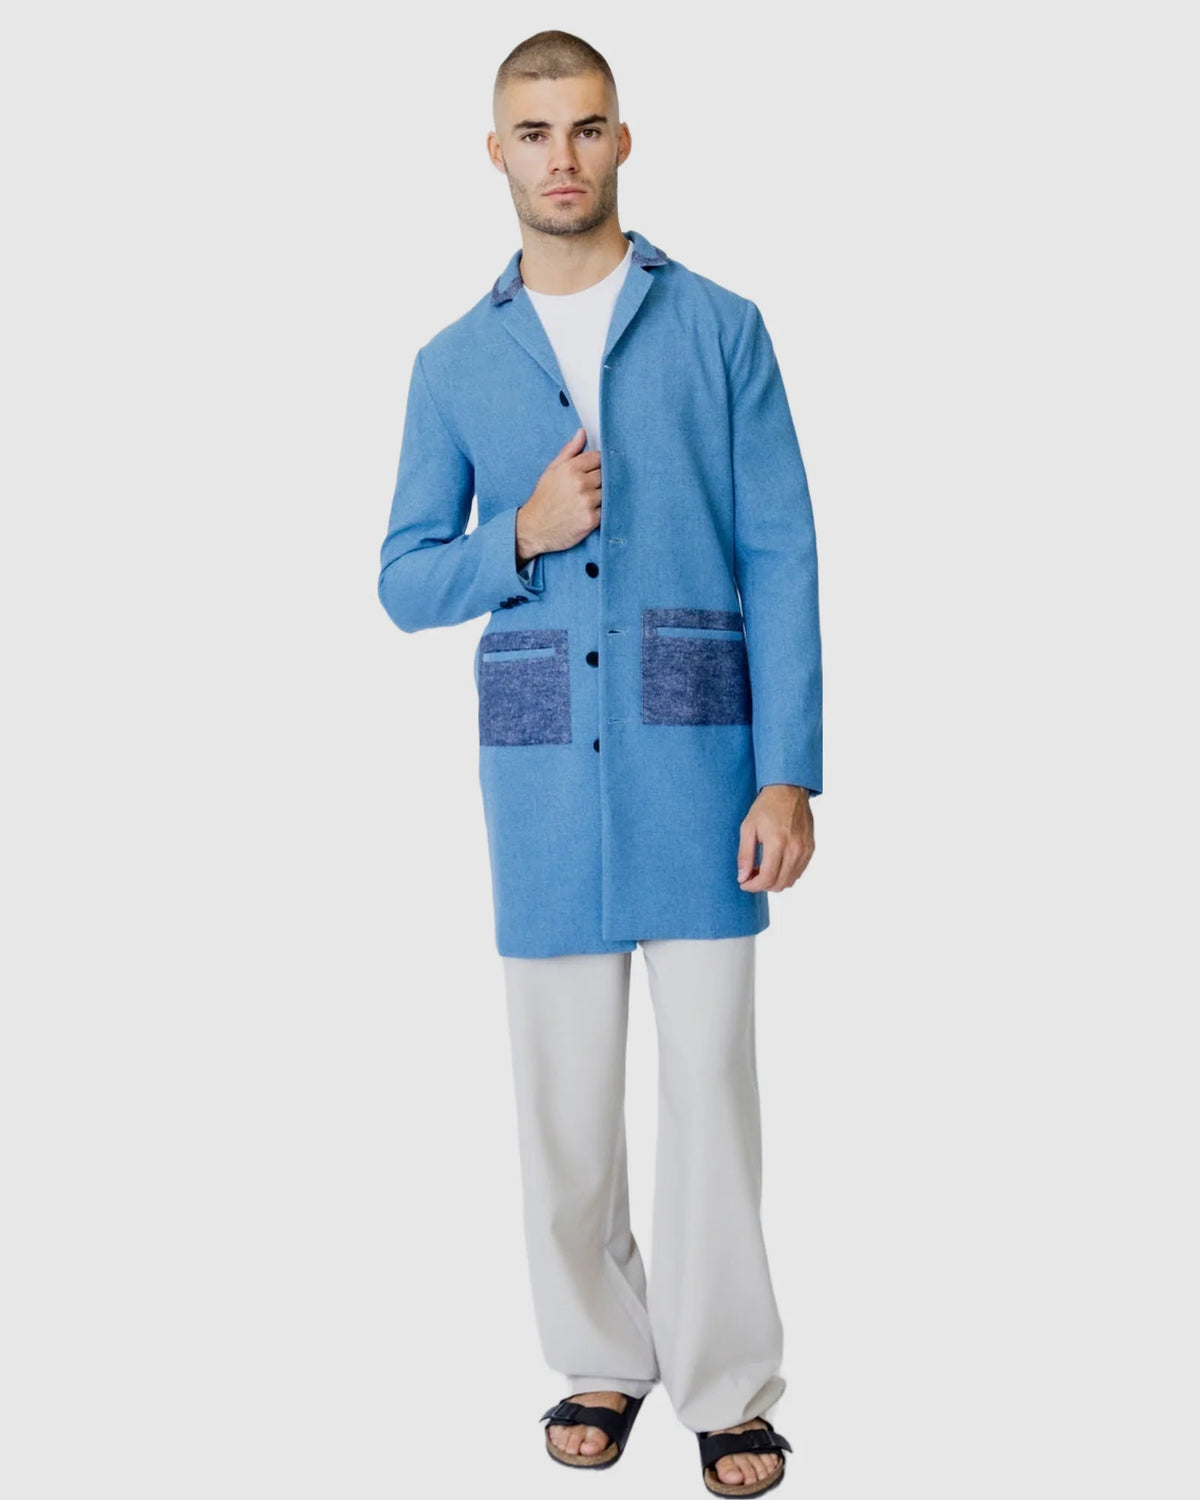 Justin Cassin Hemming Woven Coat in Blue Color 2